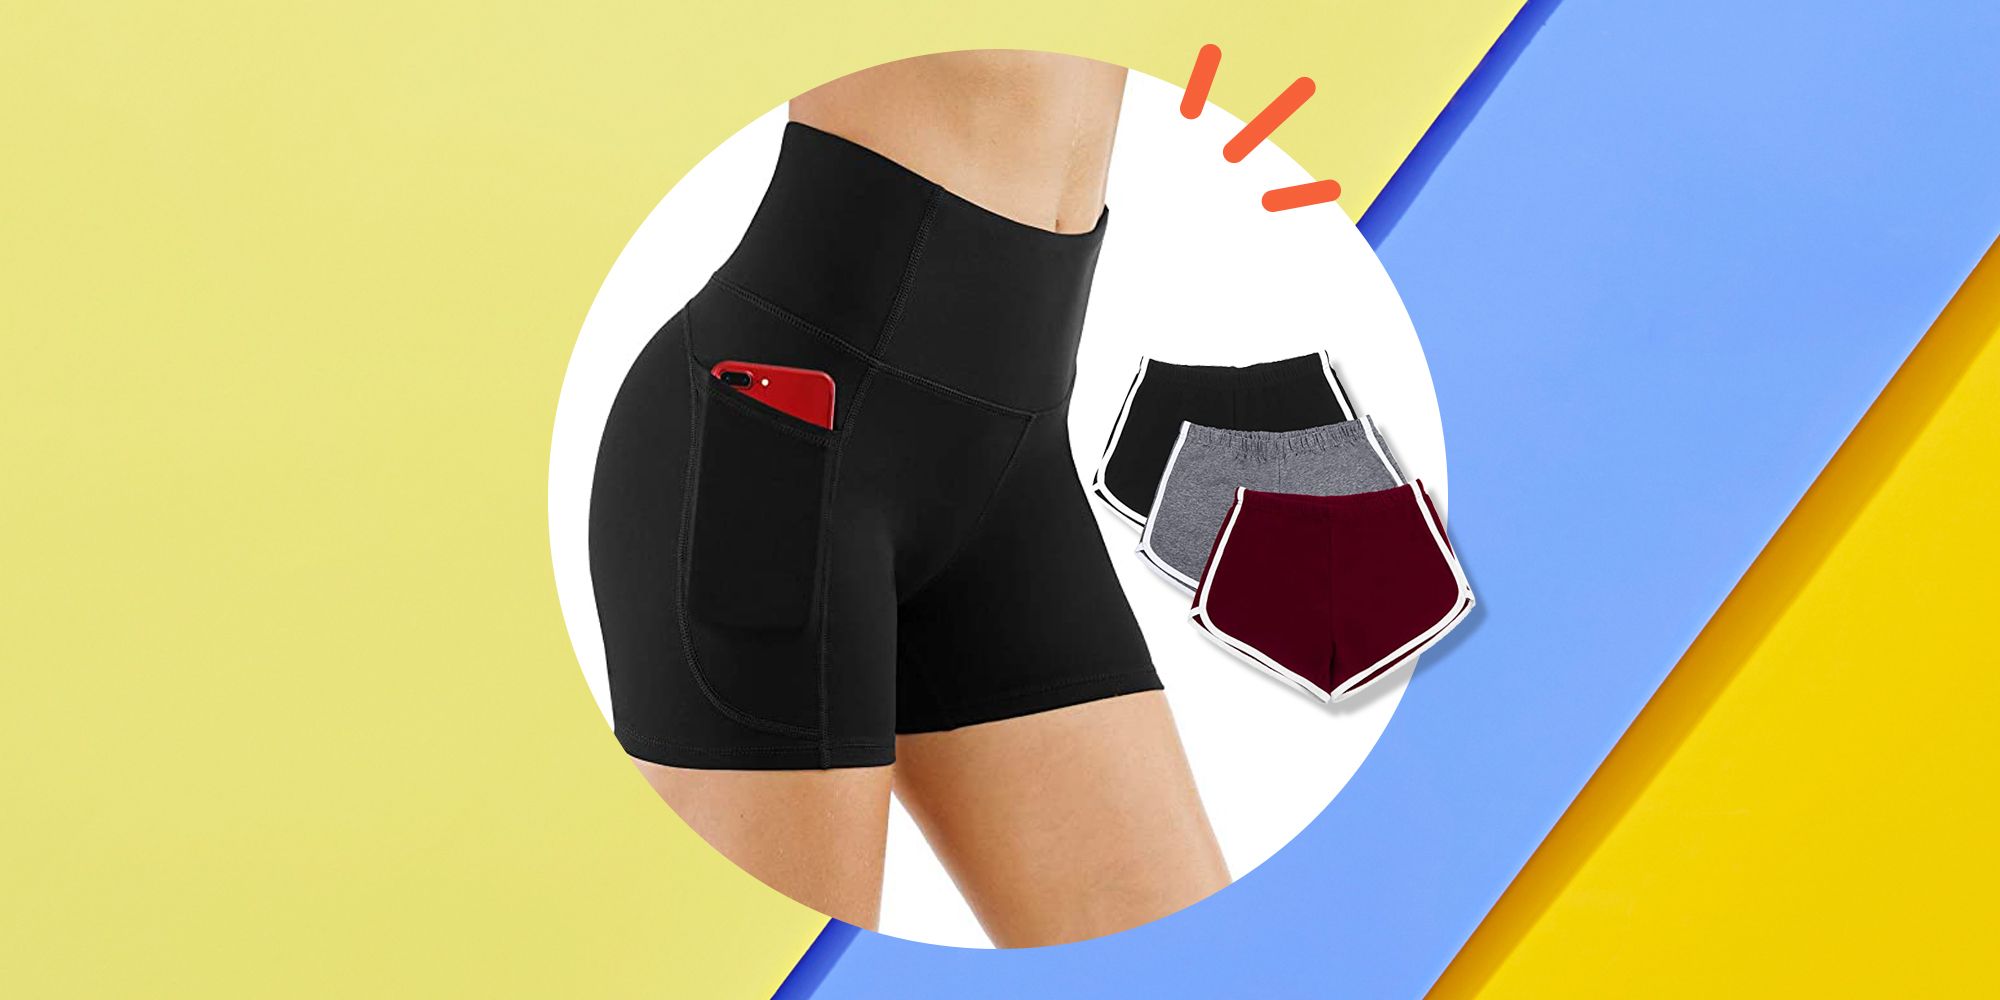 fang Fans Women High Waist Out Pocket Yoga Short Running Athletic Yoga Shorts Pants Tummy Control with Side Pockets Cycling Running Shorts